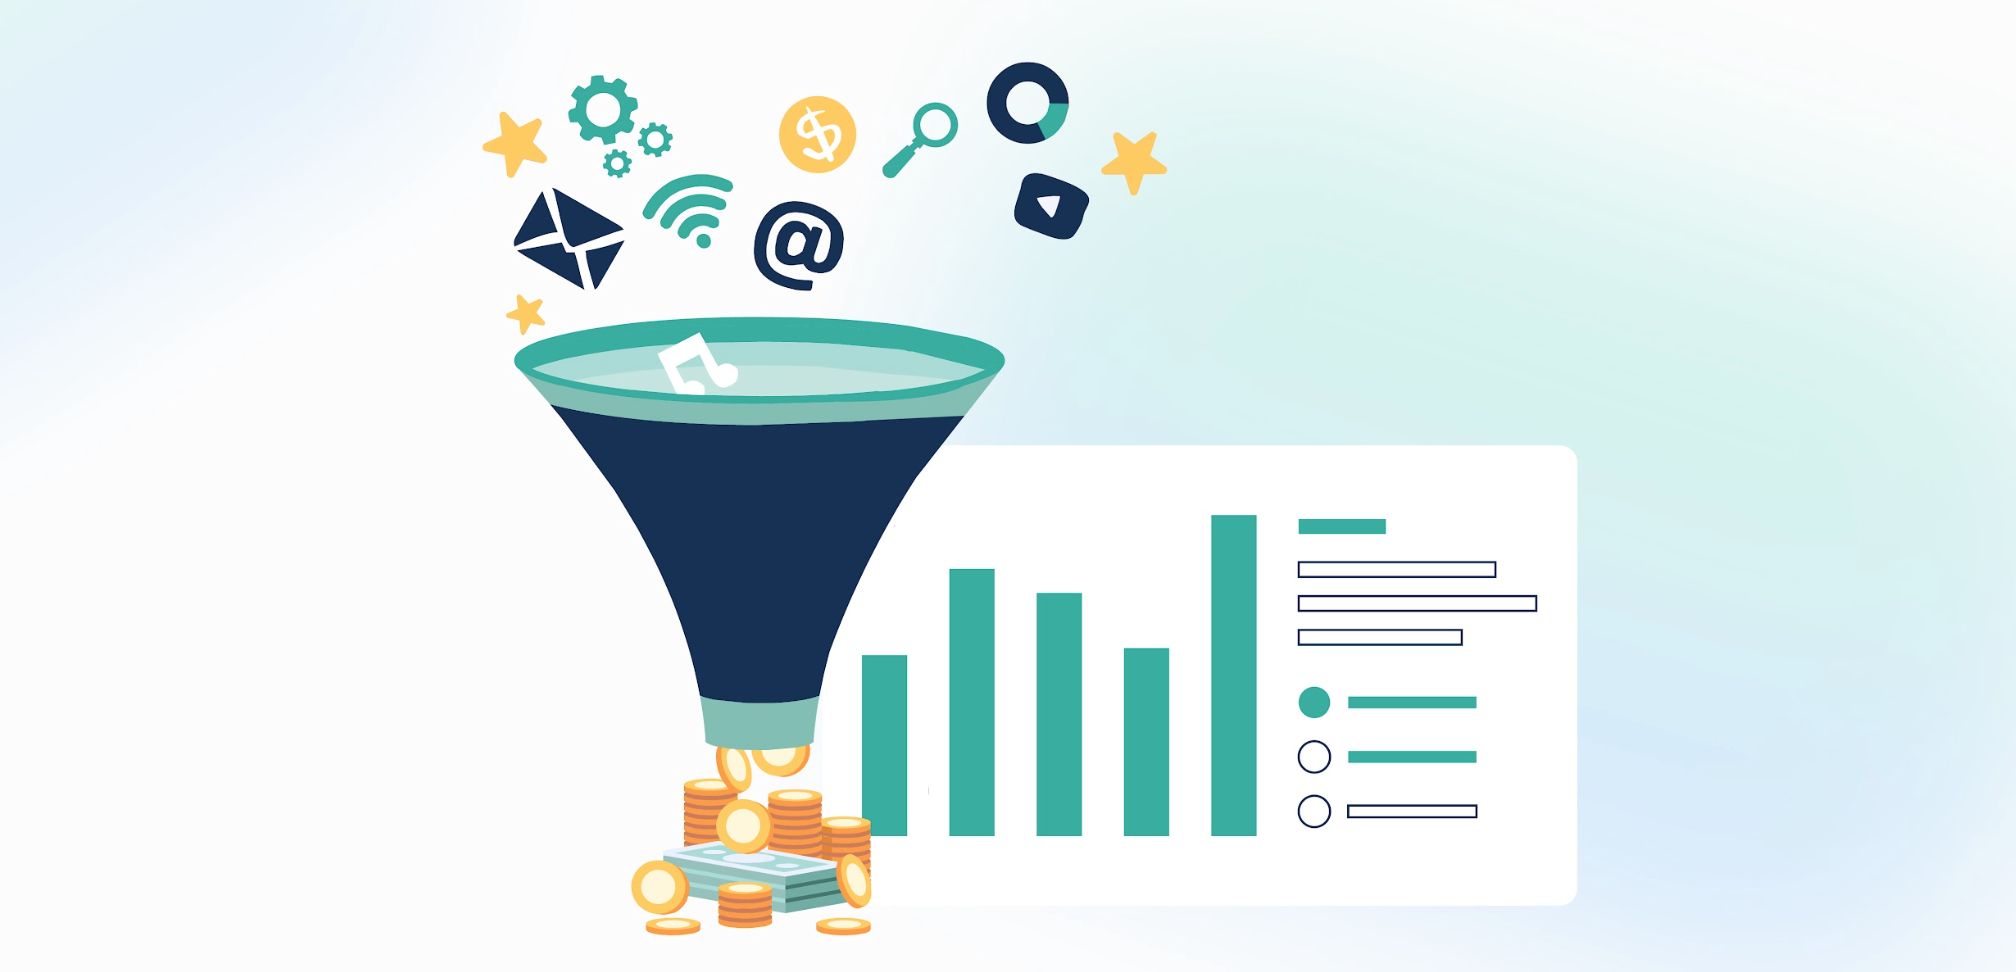 Conversion funnel to increase market share